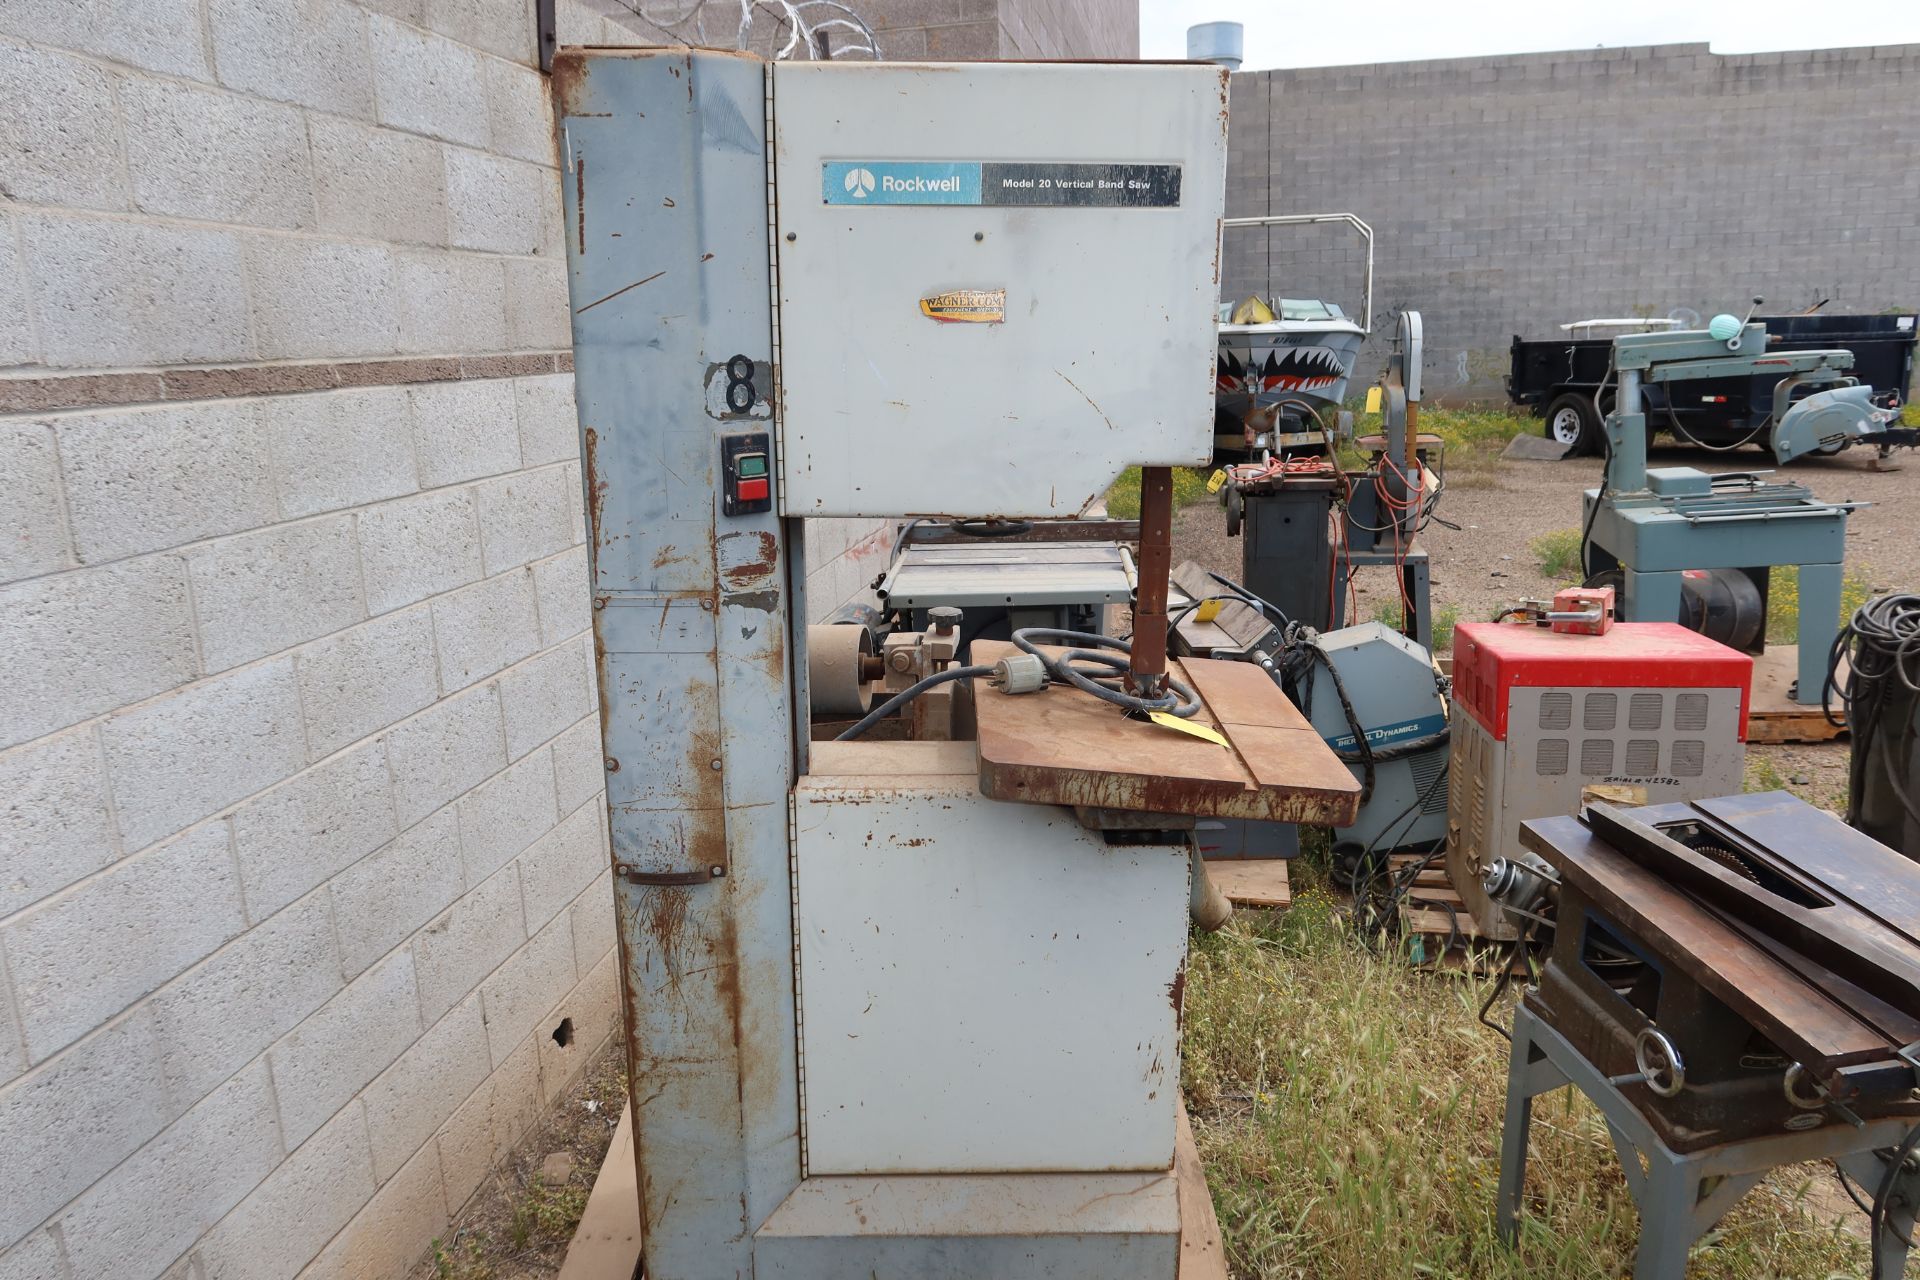 ROCKWELL MDL. 20 VERTICAL BAND SAW